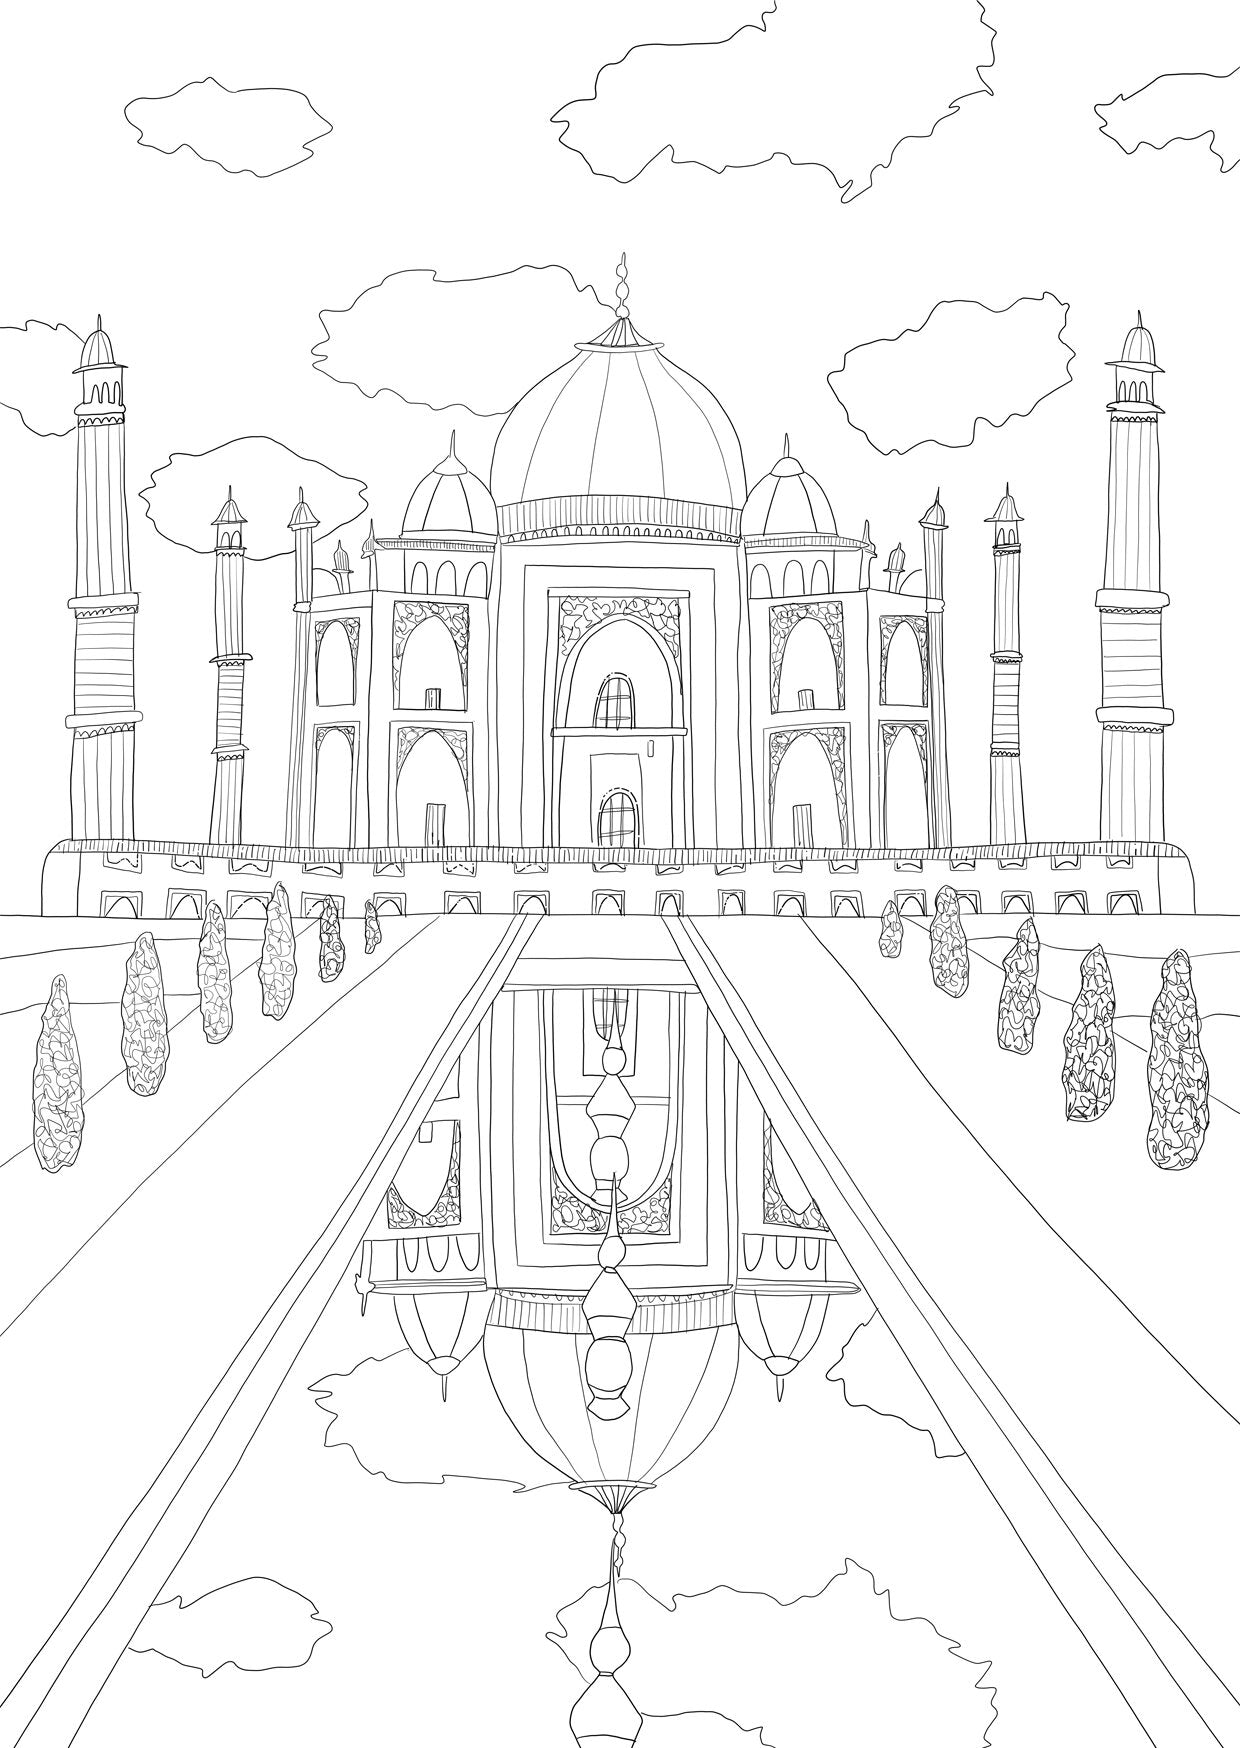 How to draw Taj mahal easy and step by step for kids and beginners  tajmahal  sketch drawing  YouTube